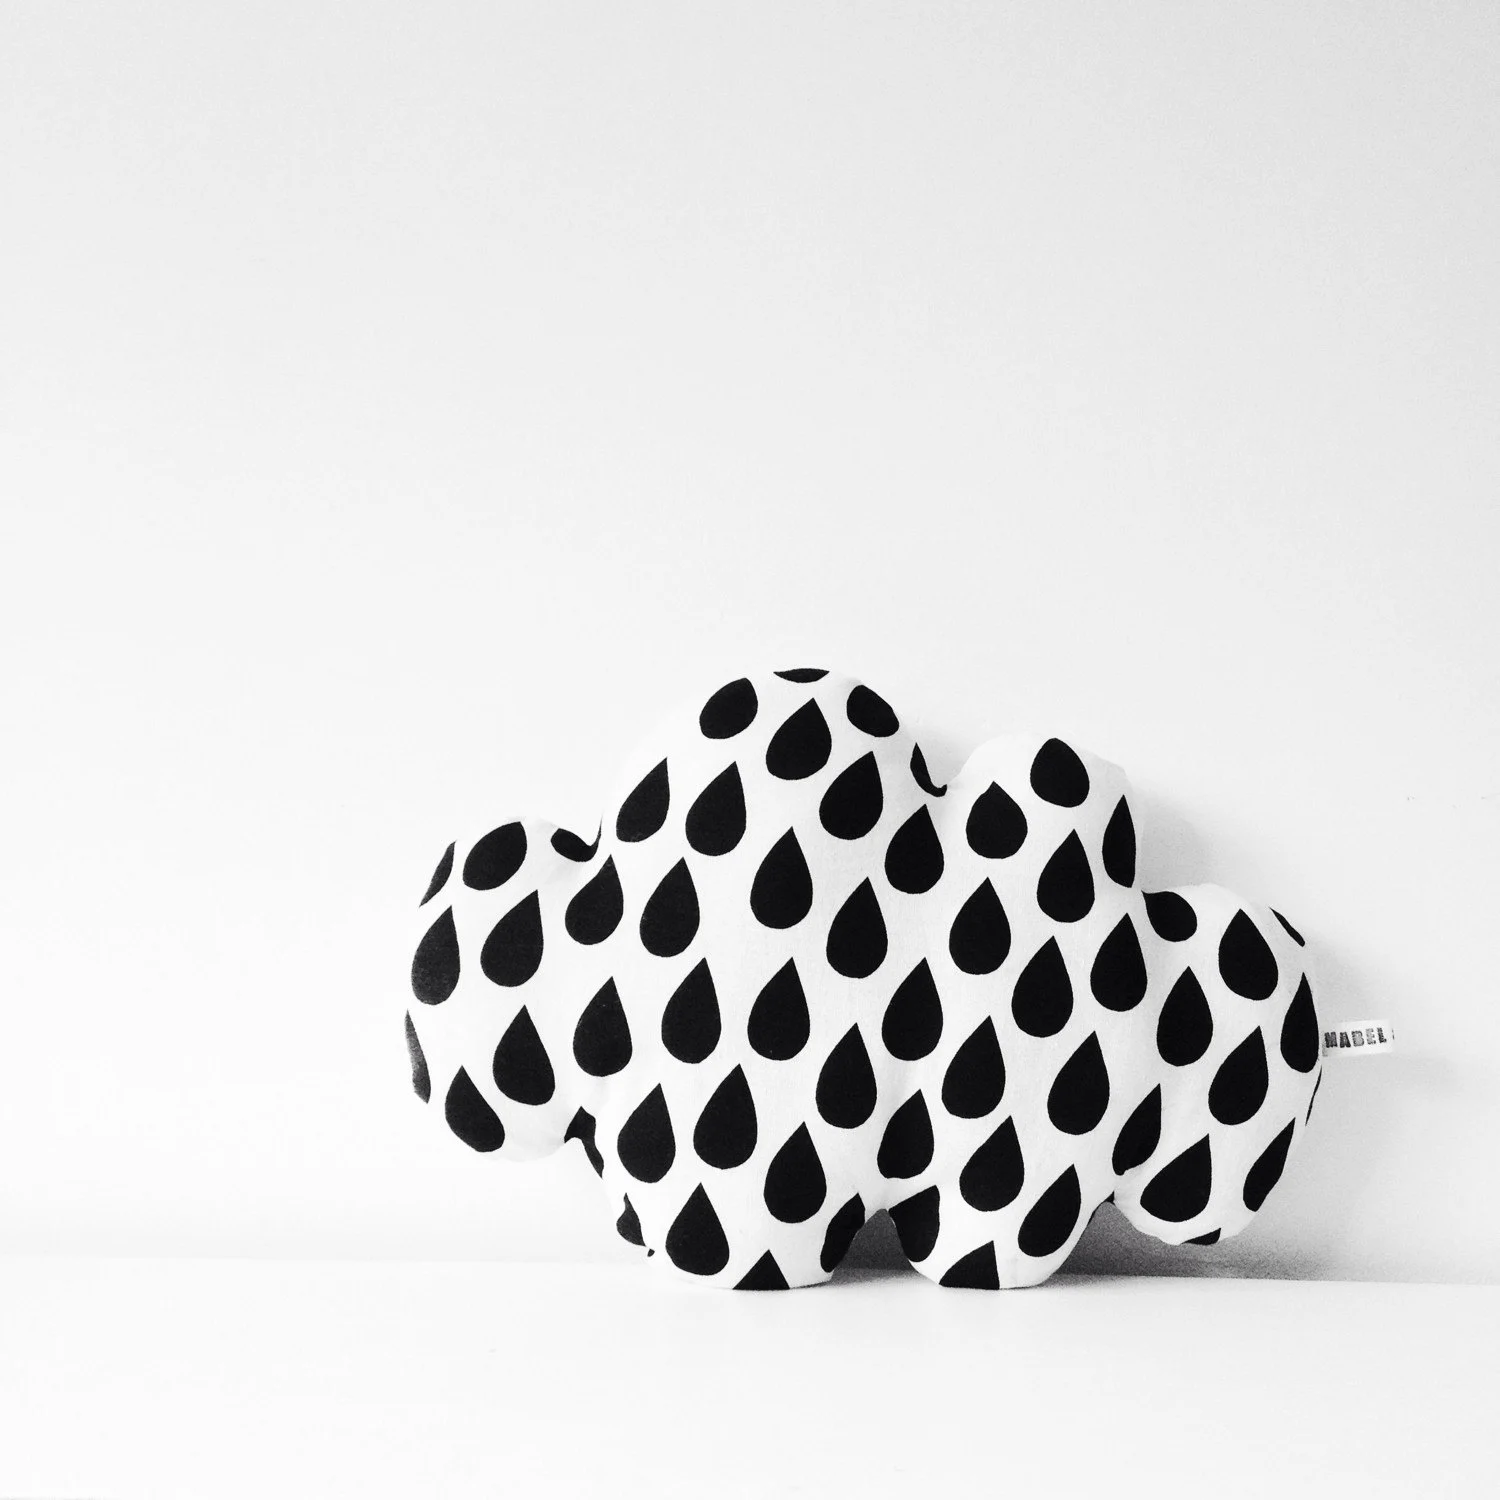 Big Raindrop Cloud Pillow from Mabel and Bird on Etsy